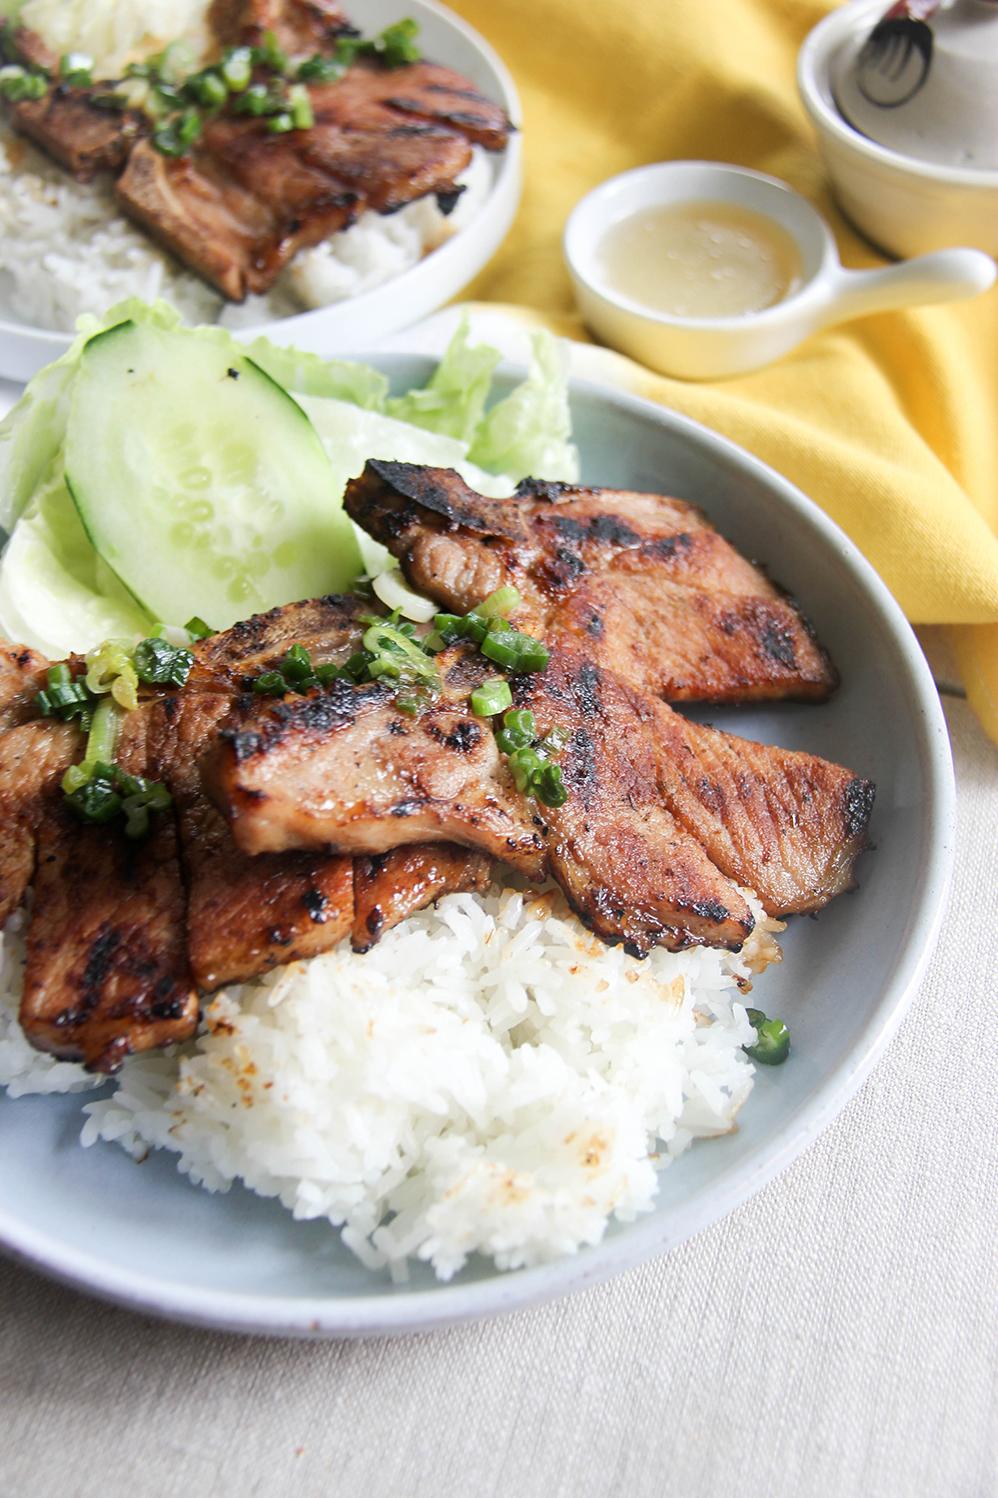  For those who love a bit of char on their meat, these grilled pork chops are